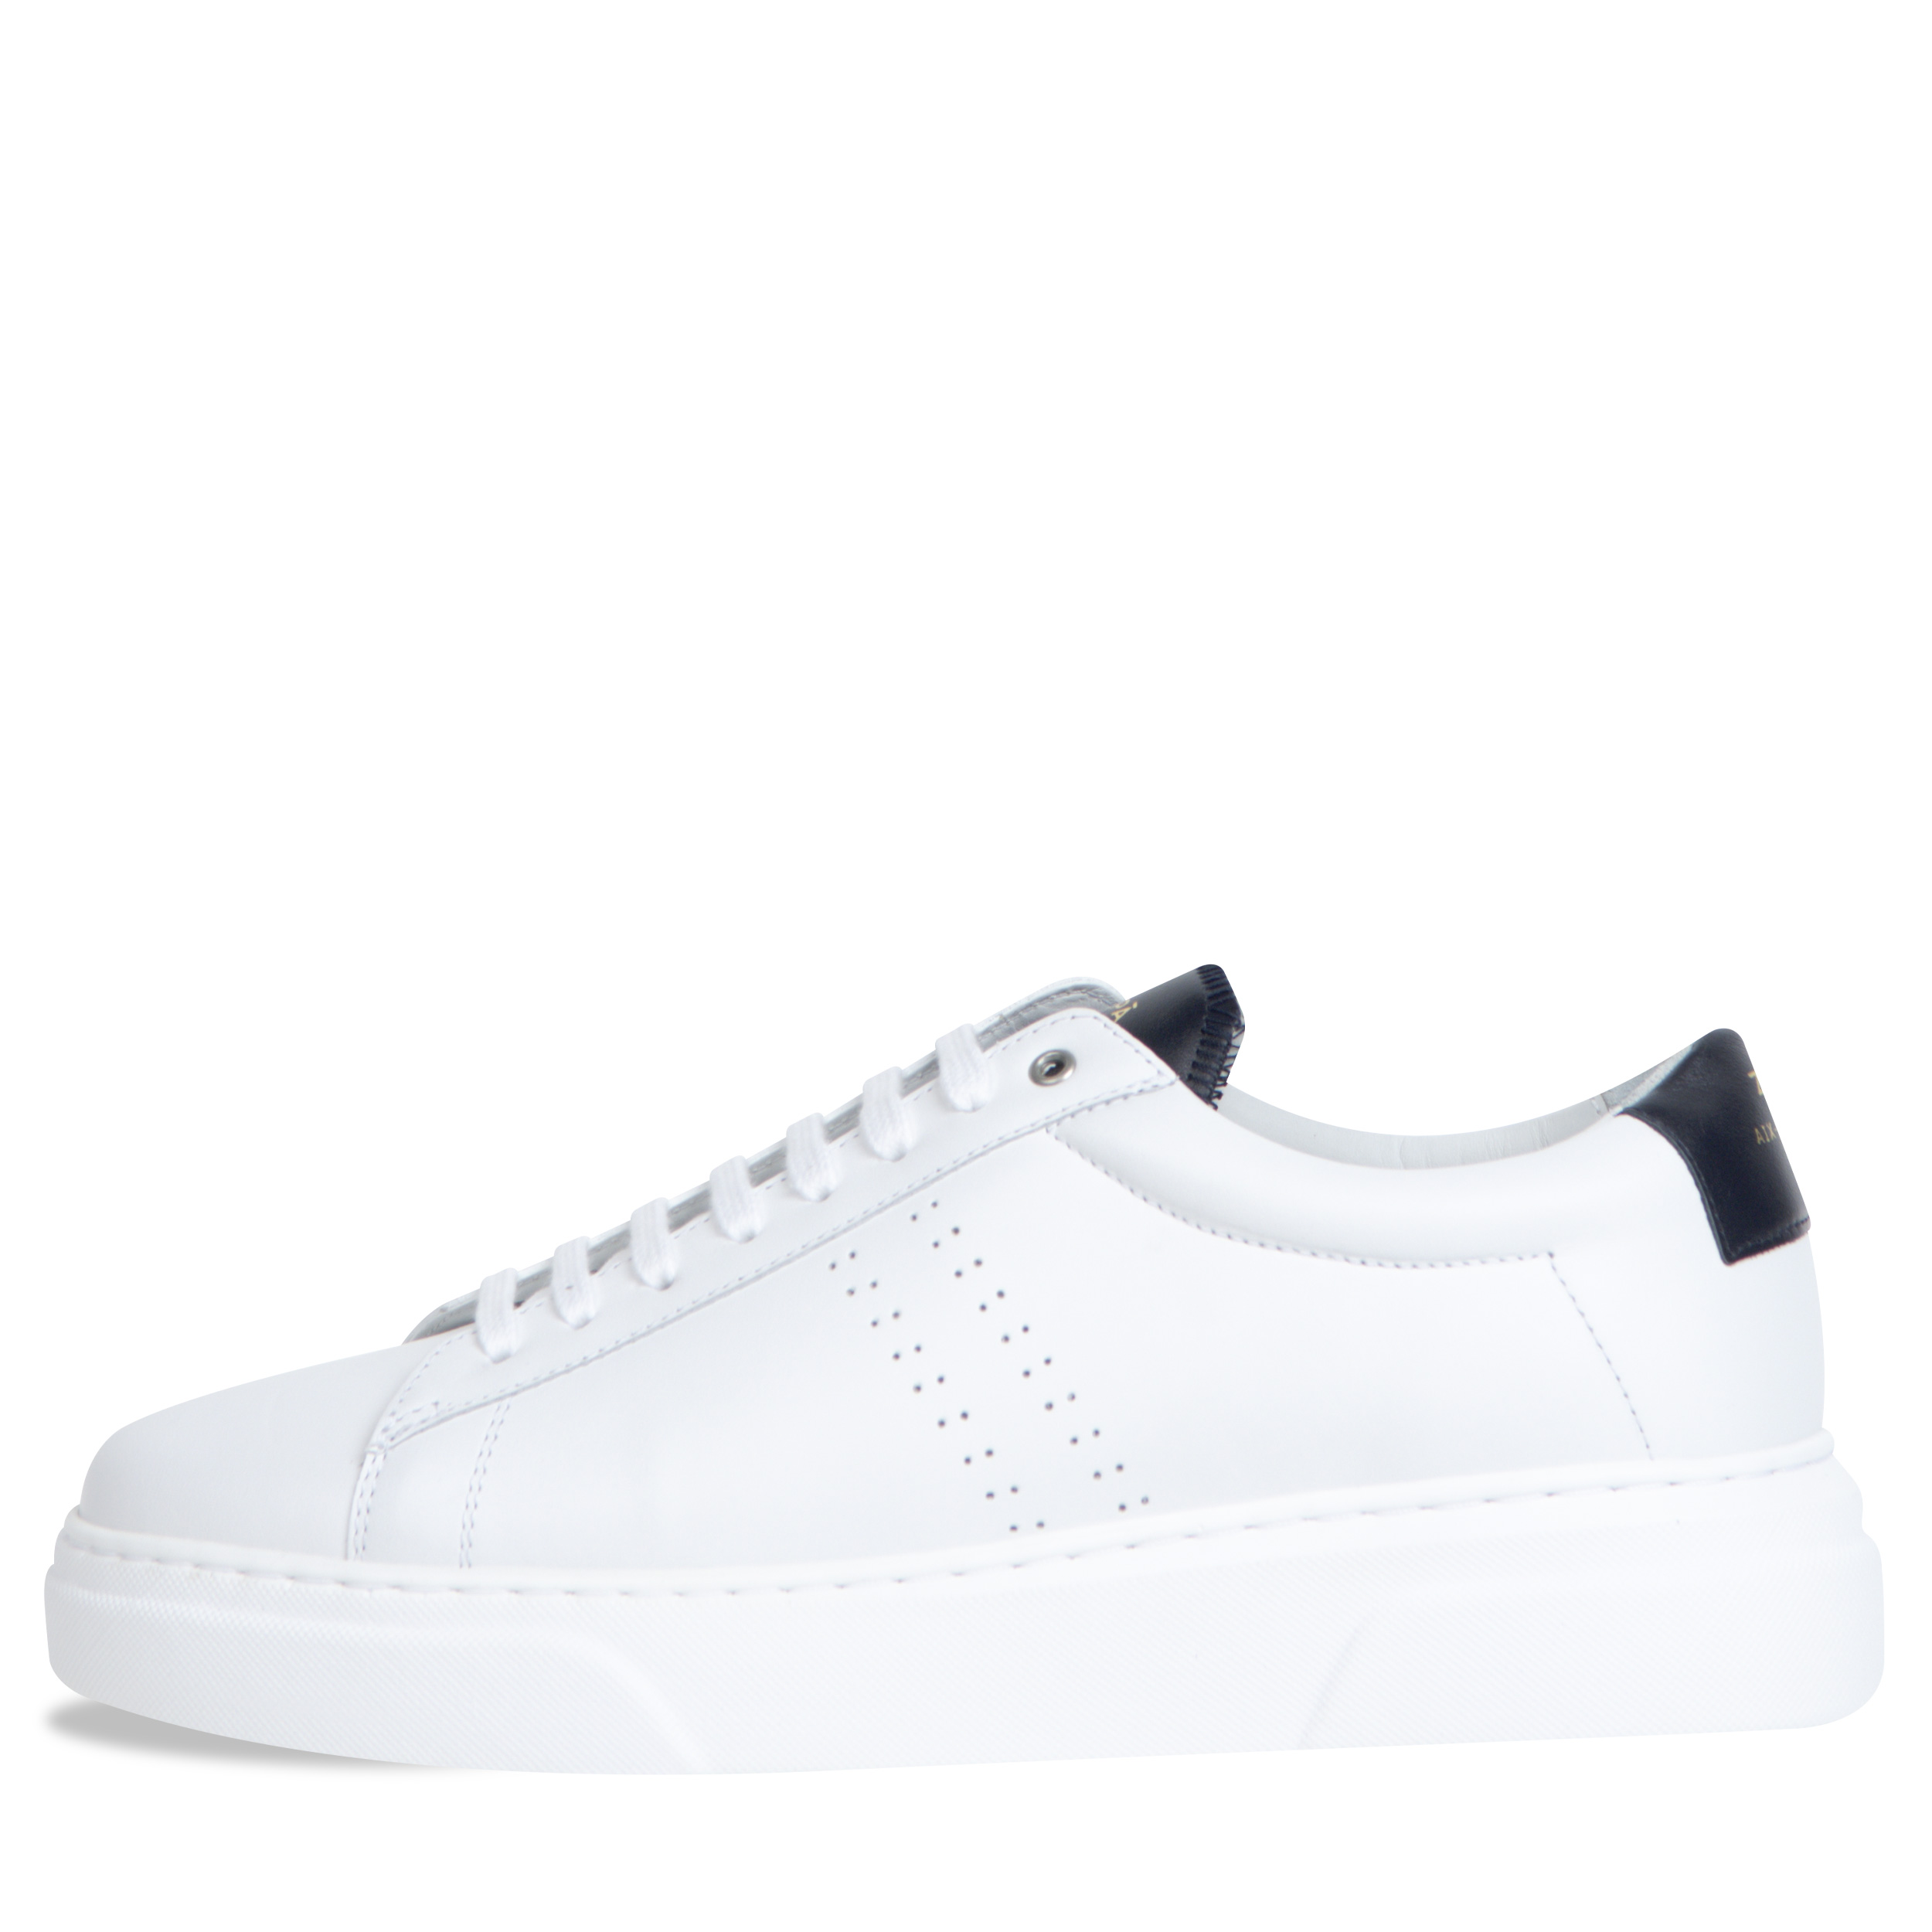 ZESPA ’ZSP4VH’ Leather Sneaker White And Navy